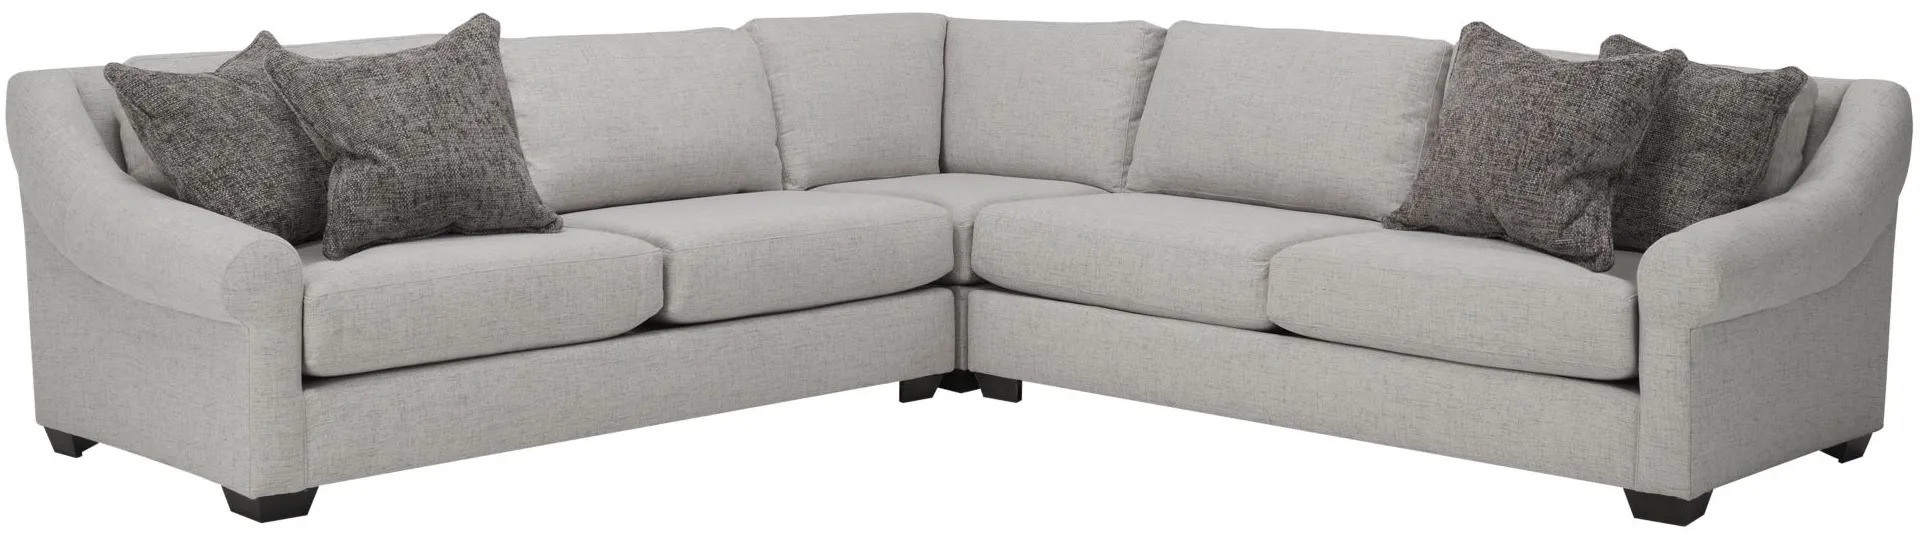 Thatcher 3-pc. Sectional in Gray by Alan White